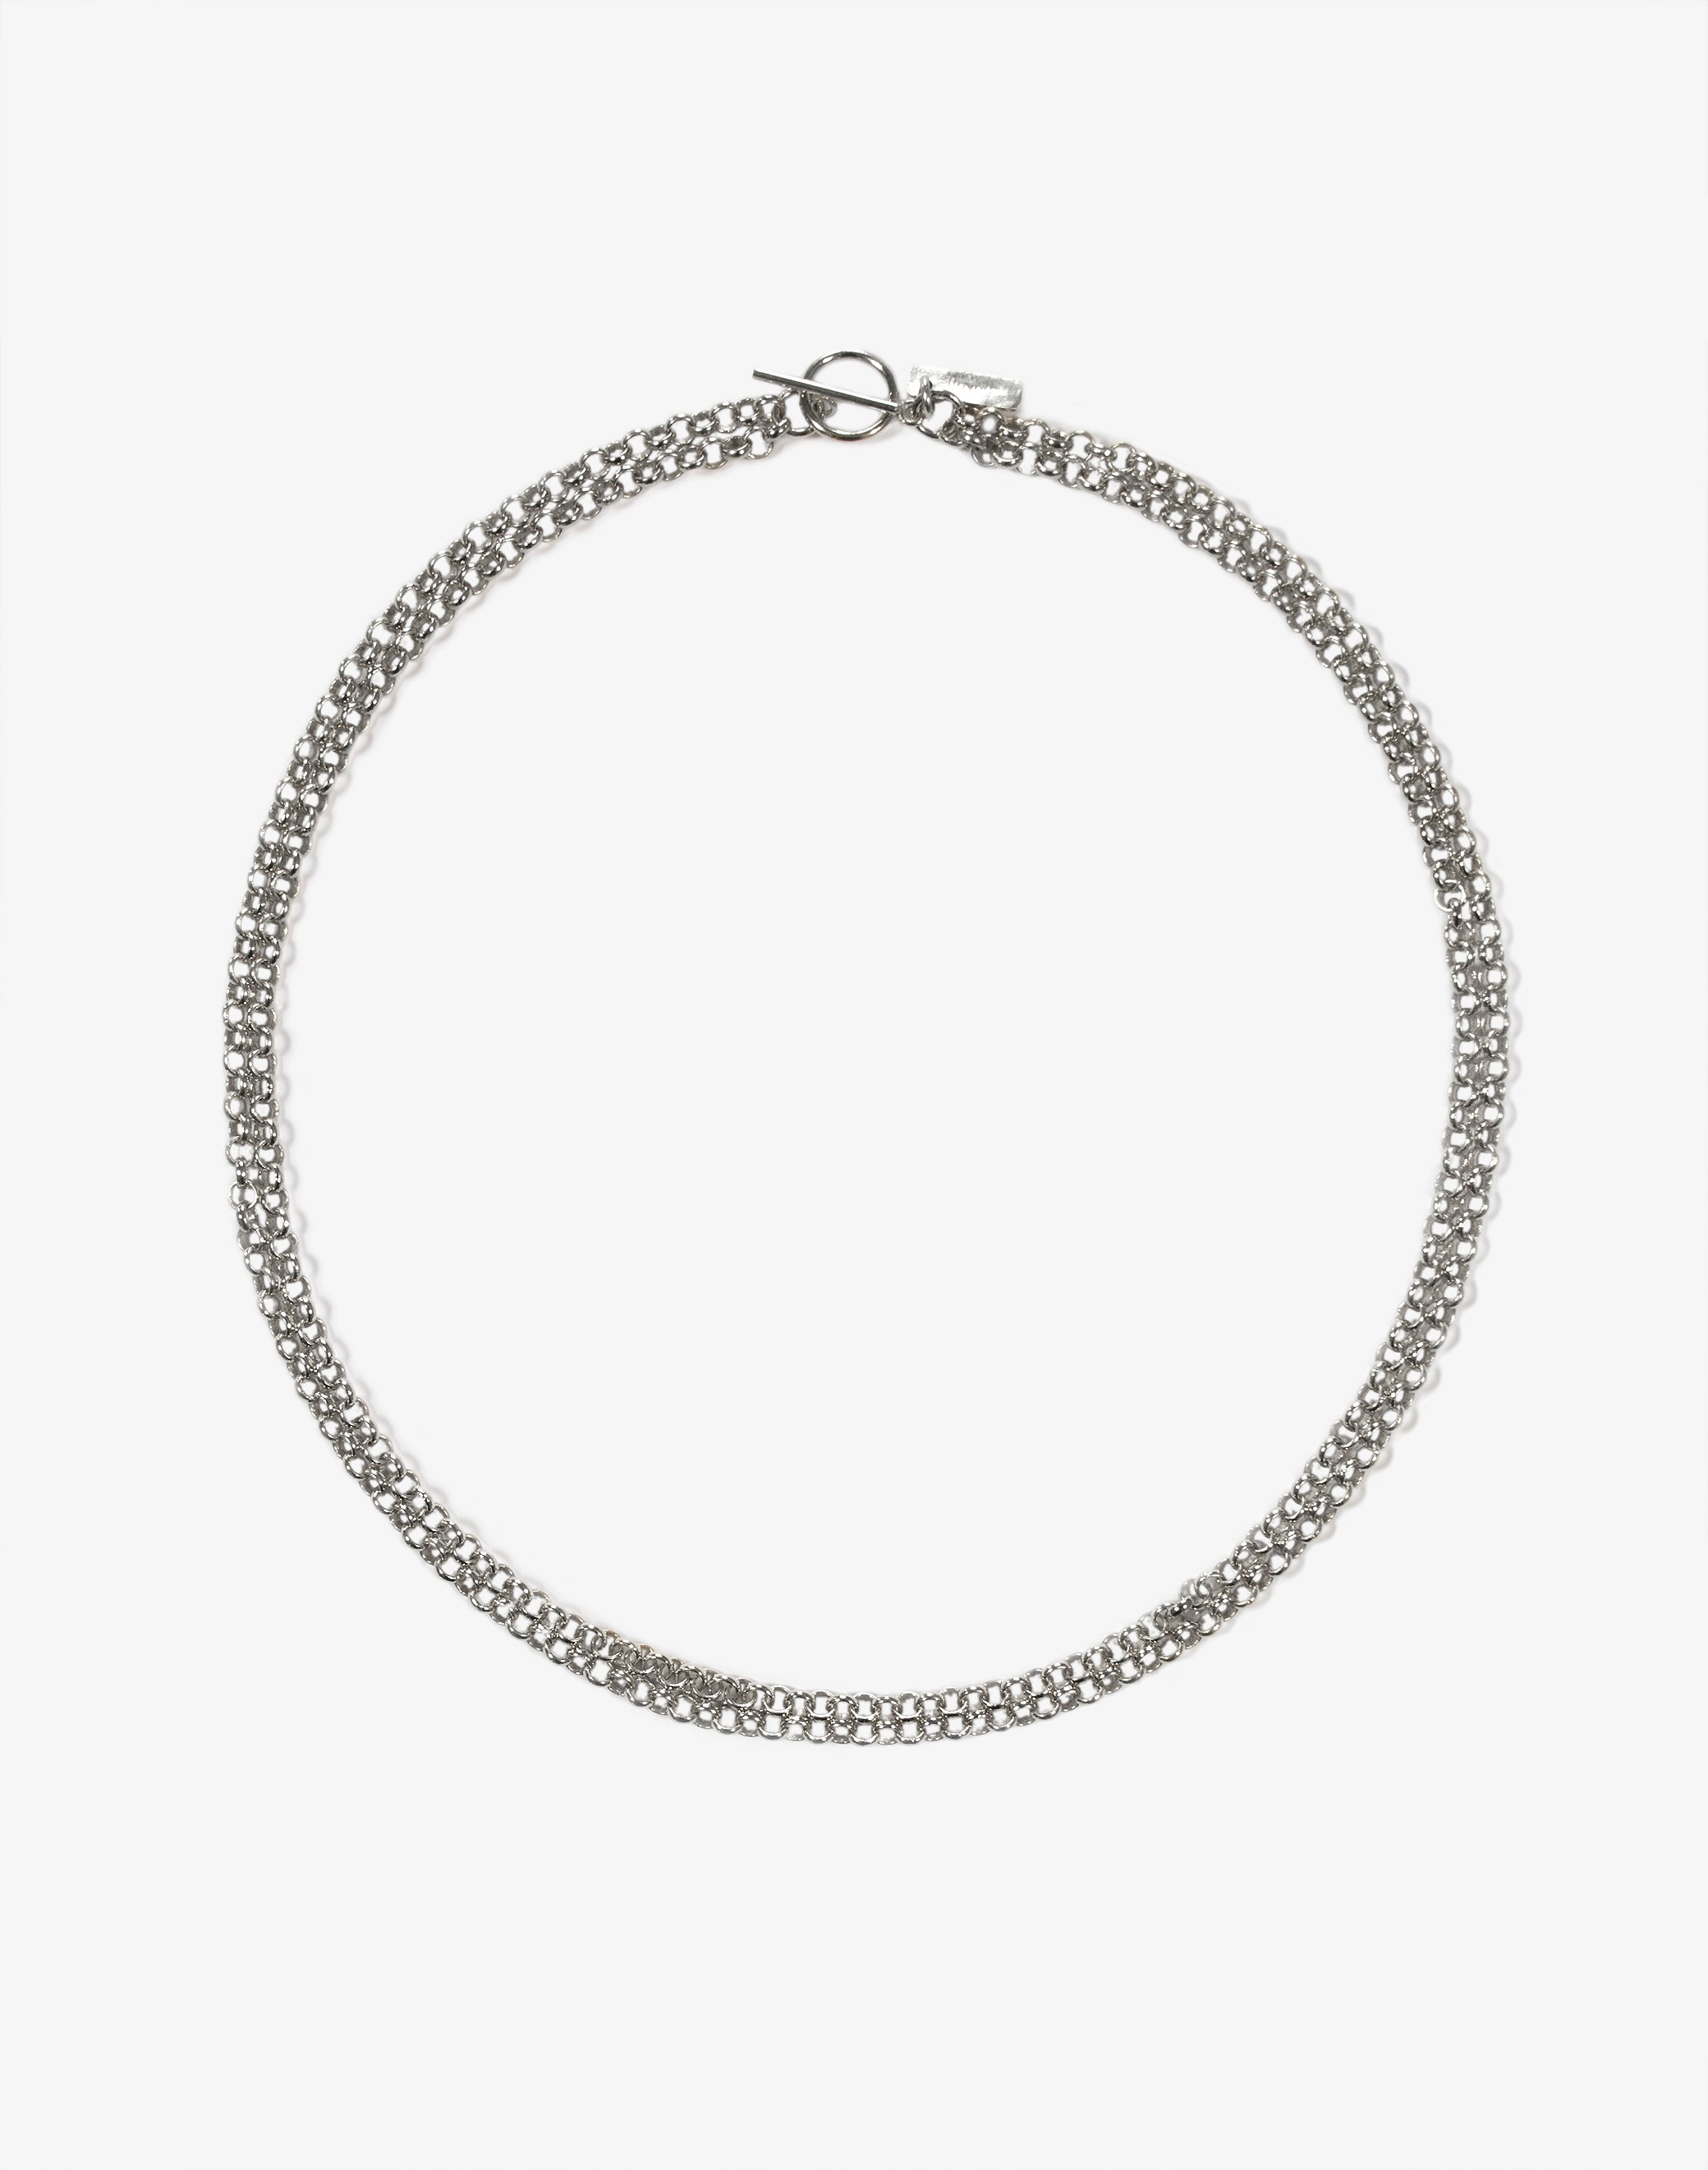 Cool Minimal men jewelry unisex silver double chain chic cnecklace - Made In Brookyn New York